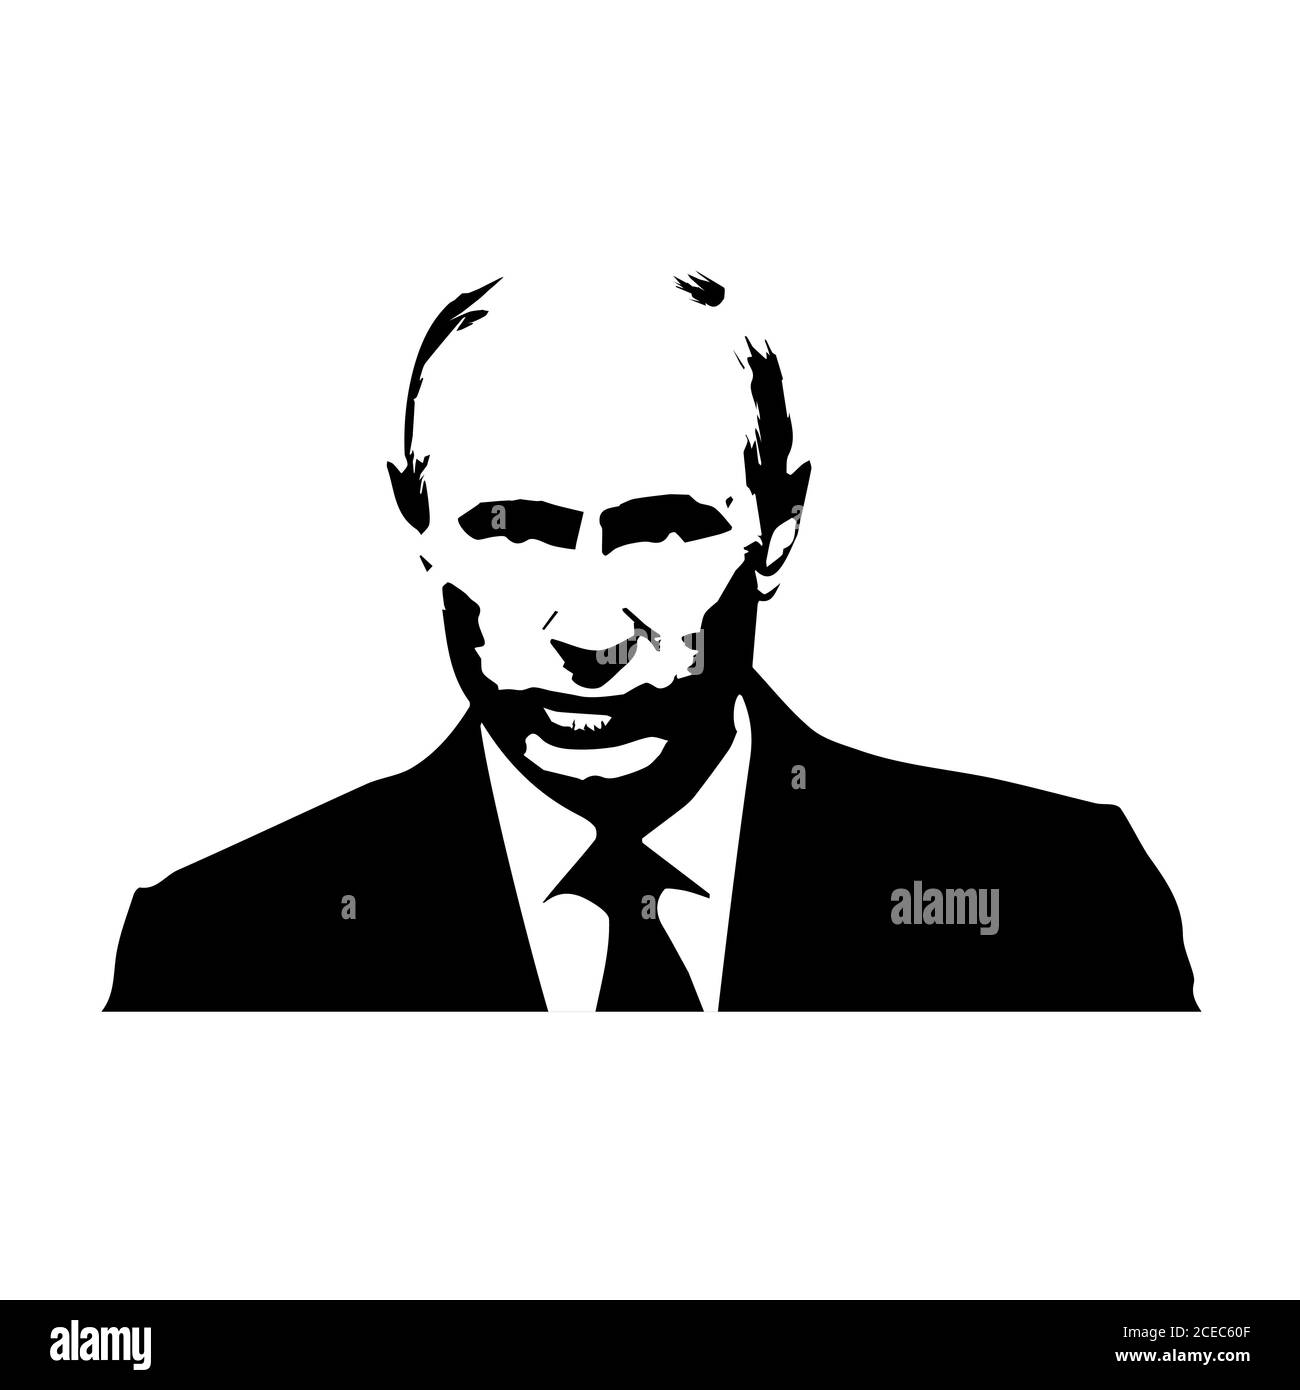 The Silhouette of Putin, black and white portrait of the Russian president. Stock Vector